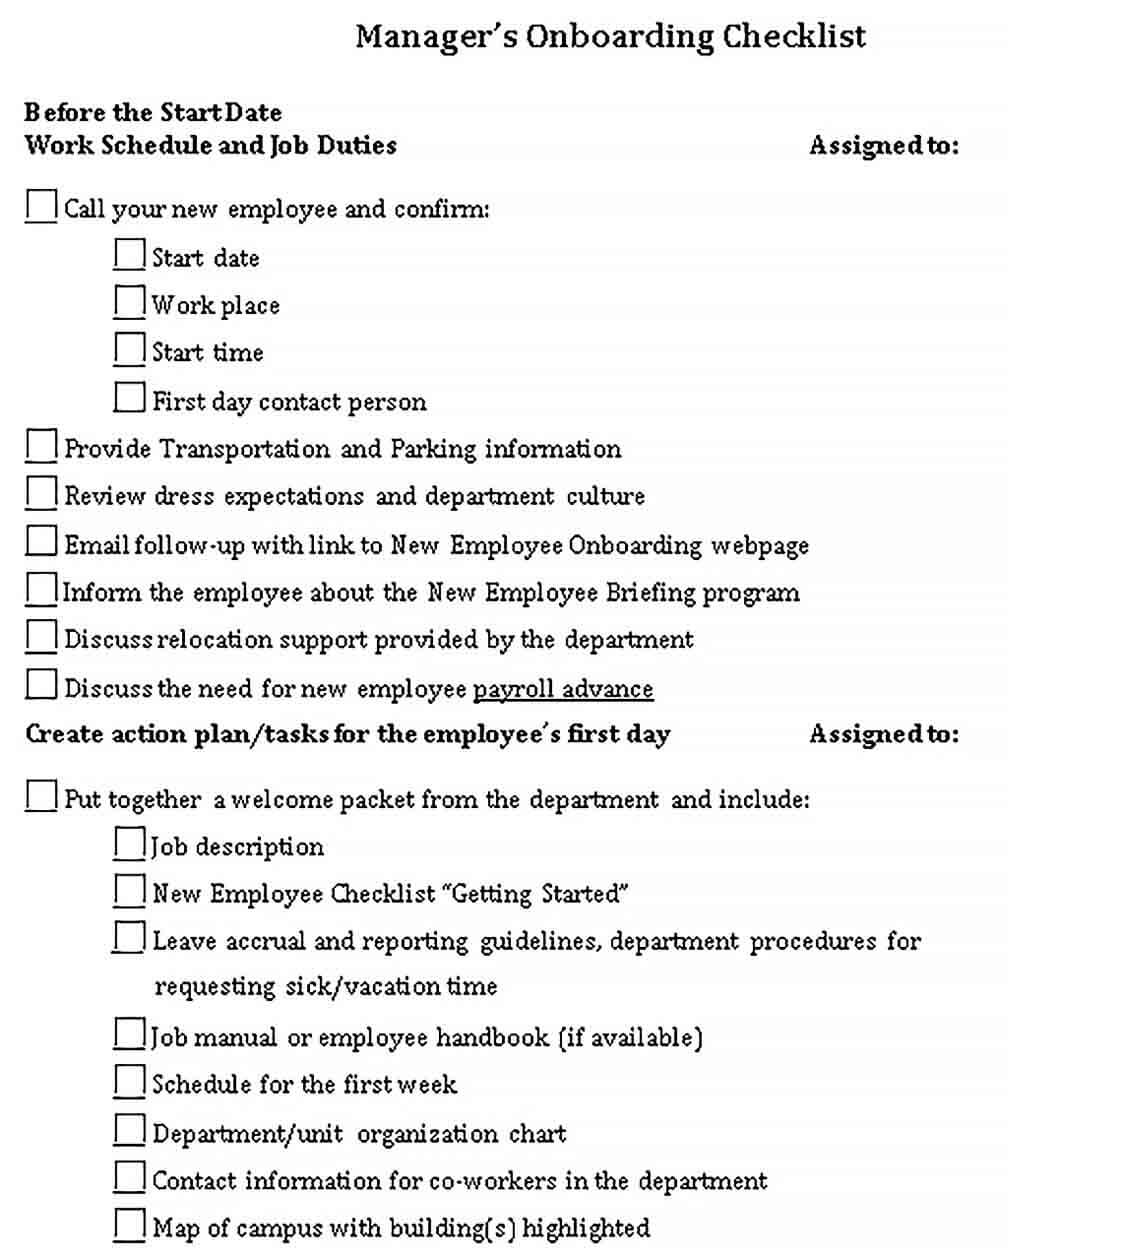 Sample Managers Onboarding Checklist PDF Format Template